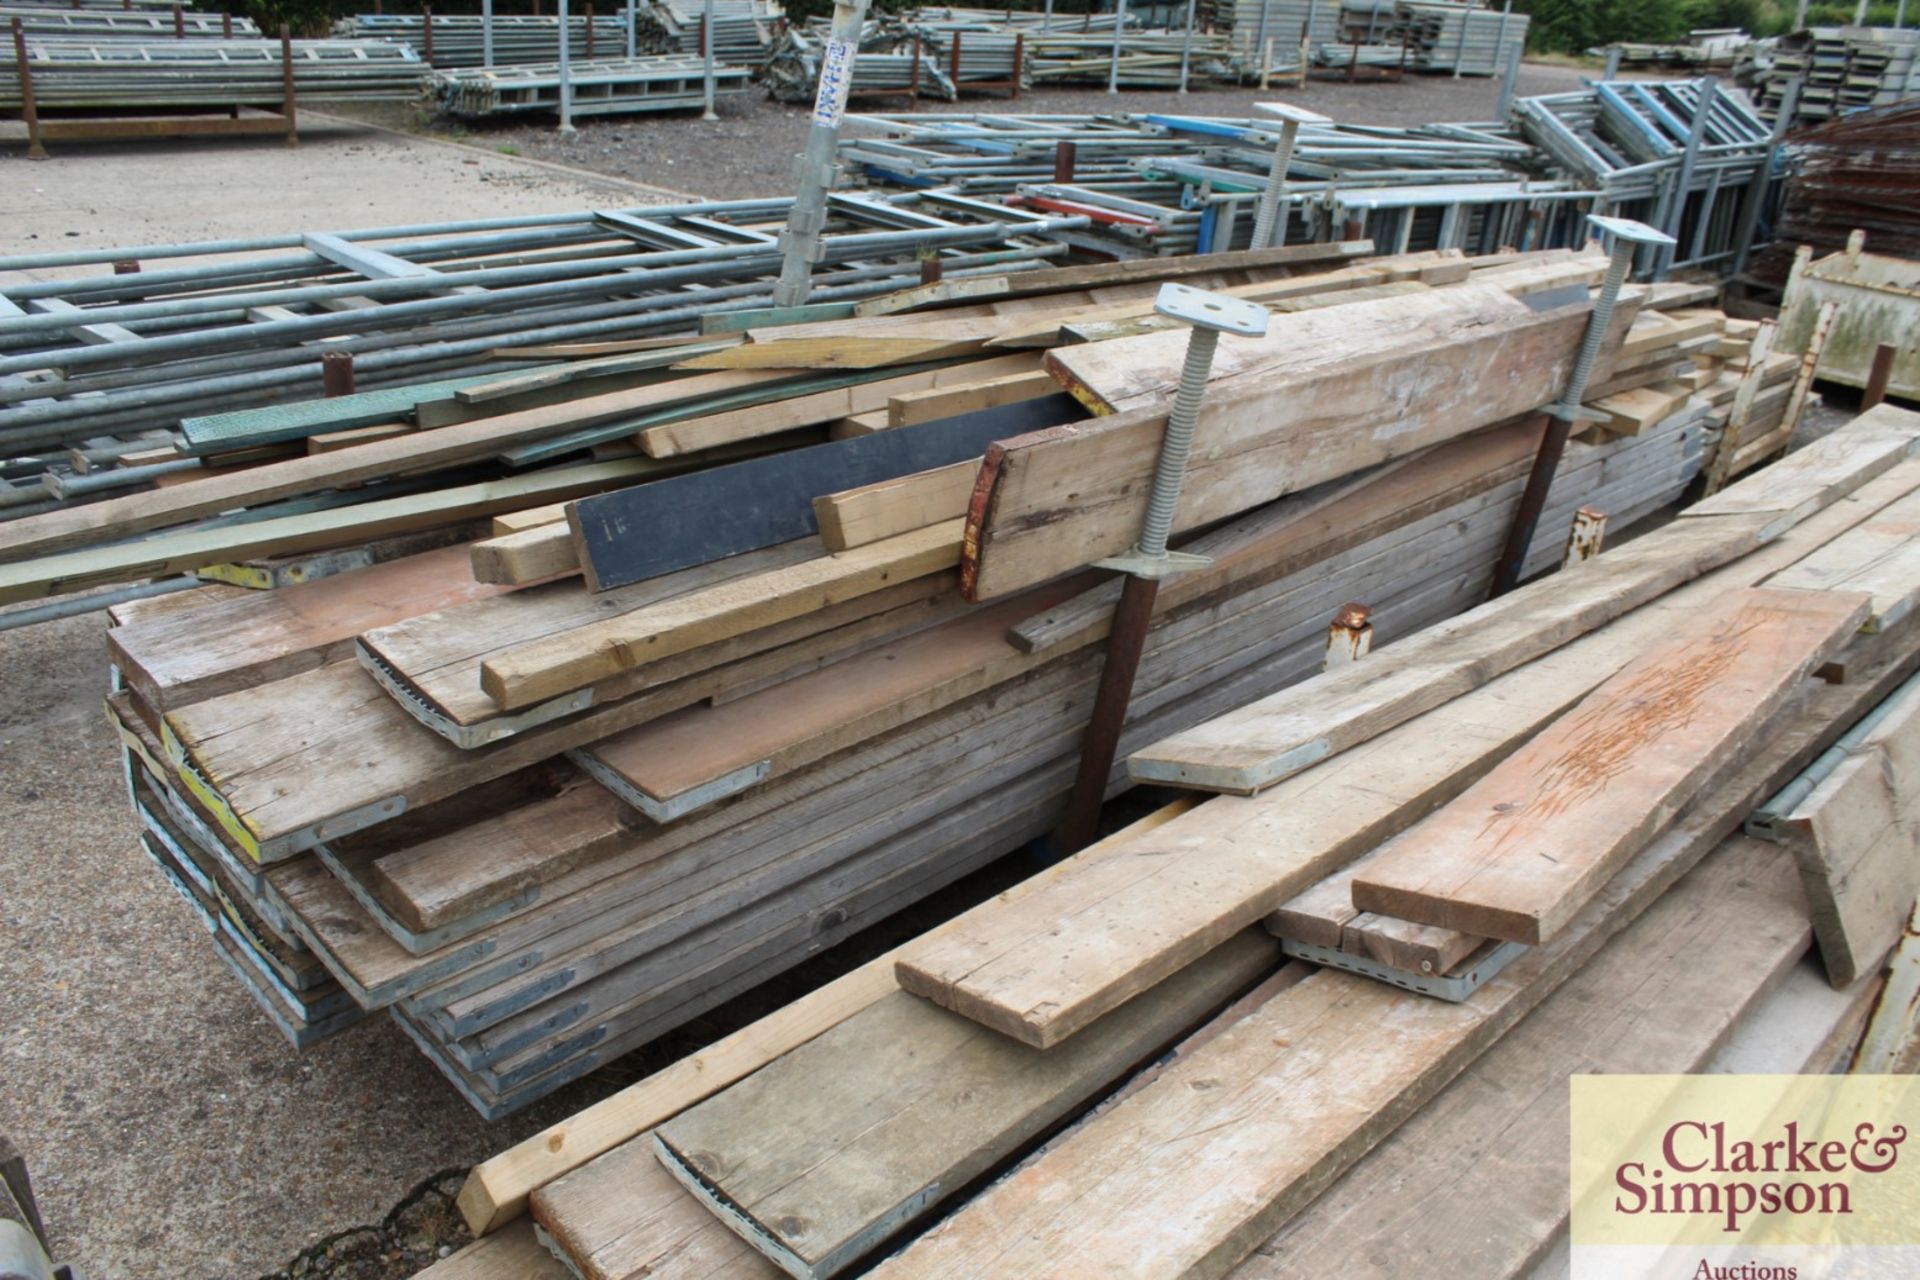 Stillage of scaffold boards and other timber.